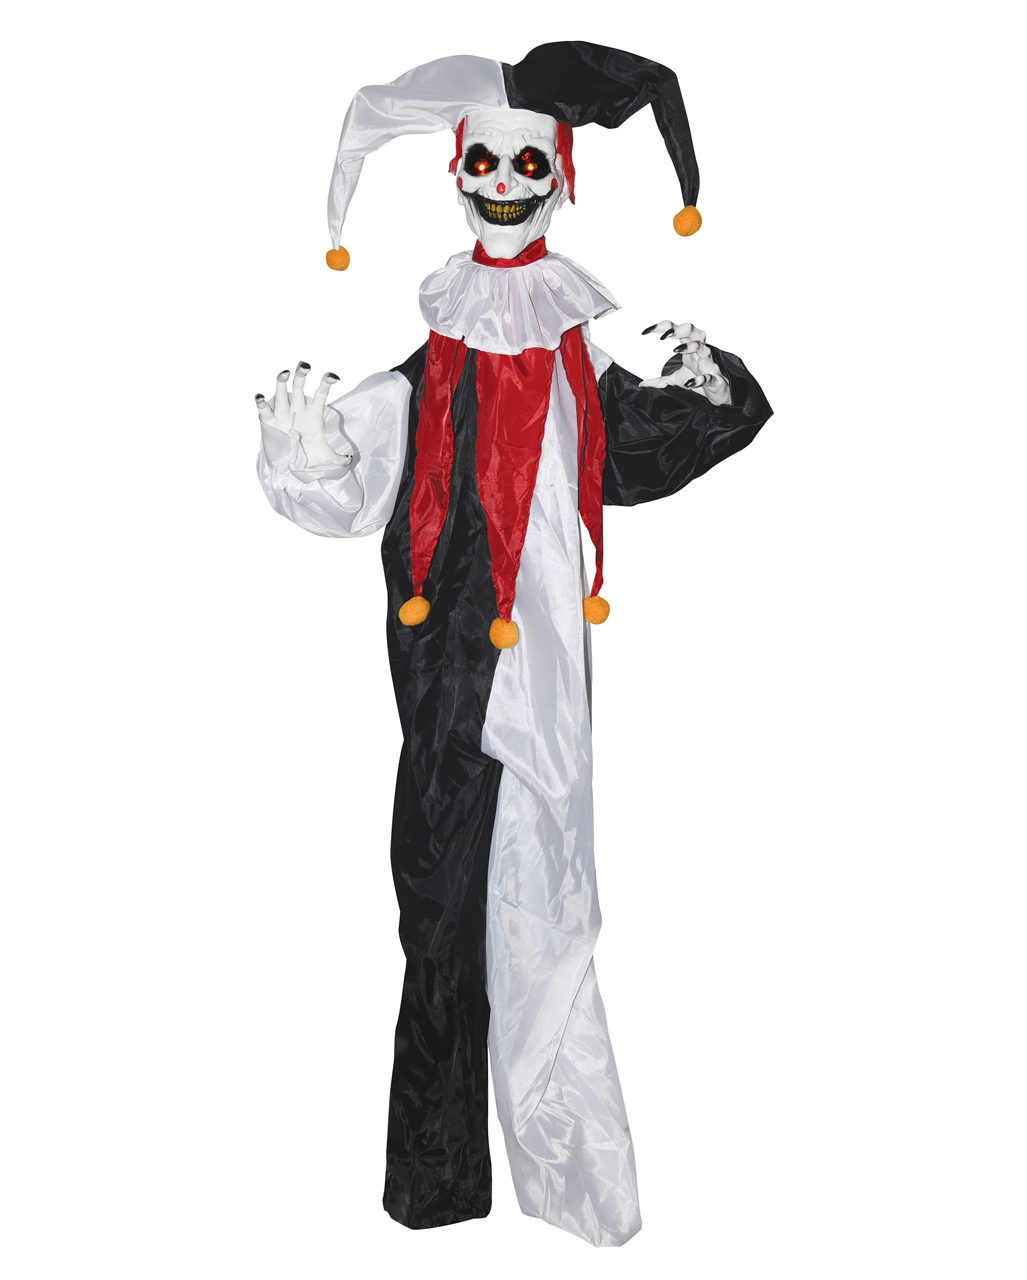 Animated Horror Clown Hanging Prop 144cm 